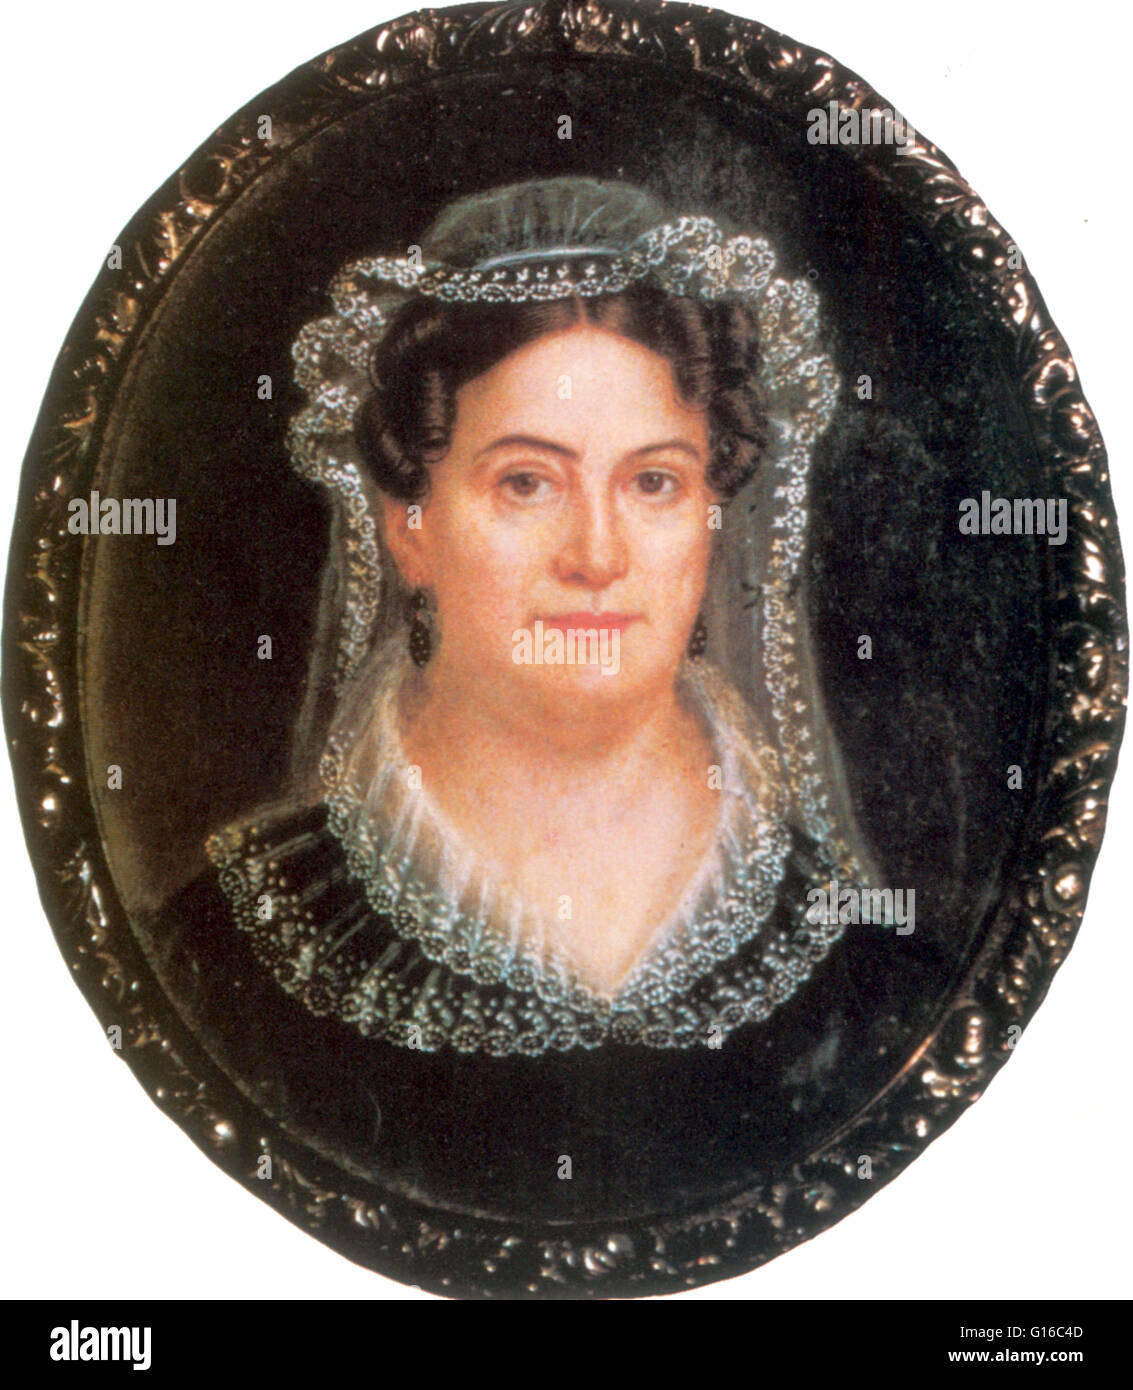 Rachel Donelson Robards Jackson (June 15, 1767 - December 22, 1828) was the wife of Andrew Jackson, the 7th President of the United States. She lived with him at their home at The Hermitage, but died before his inauguration in 1829, and therefore was neve Stock Photo